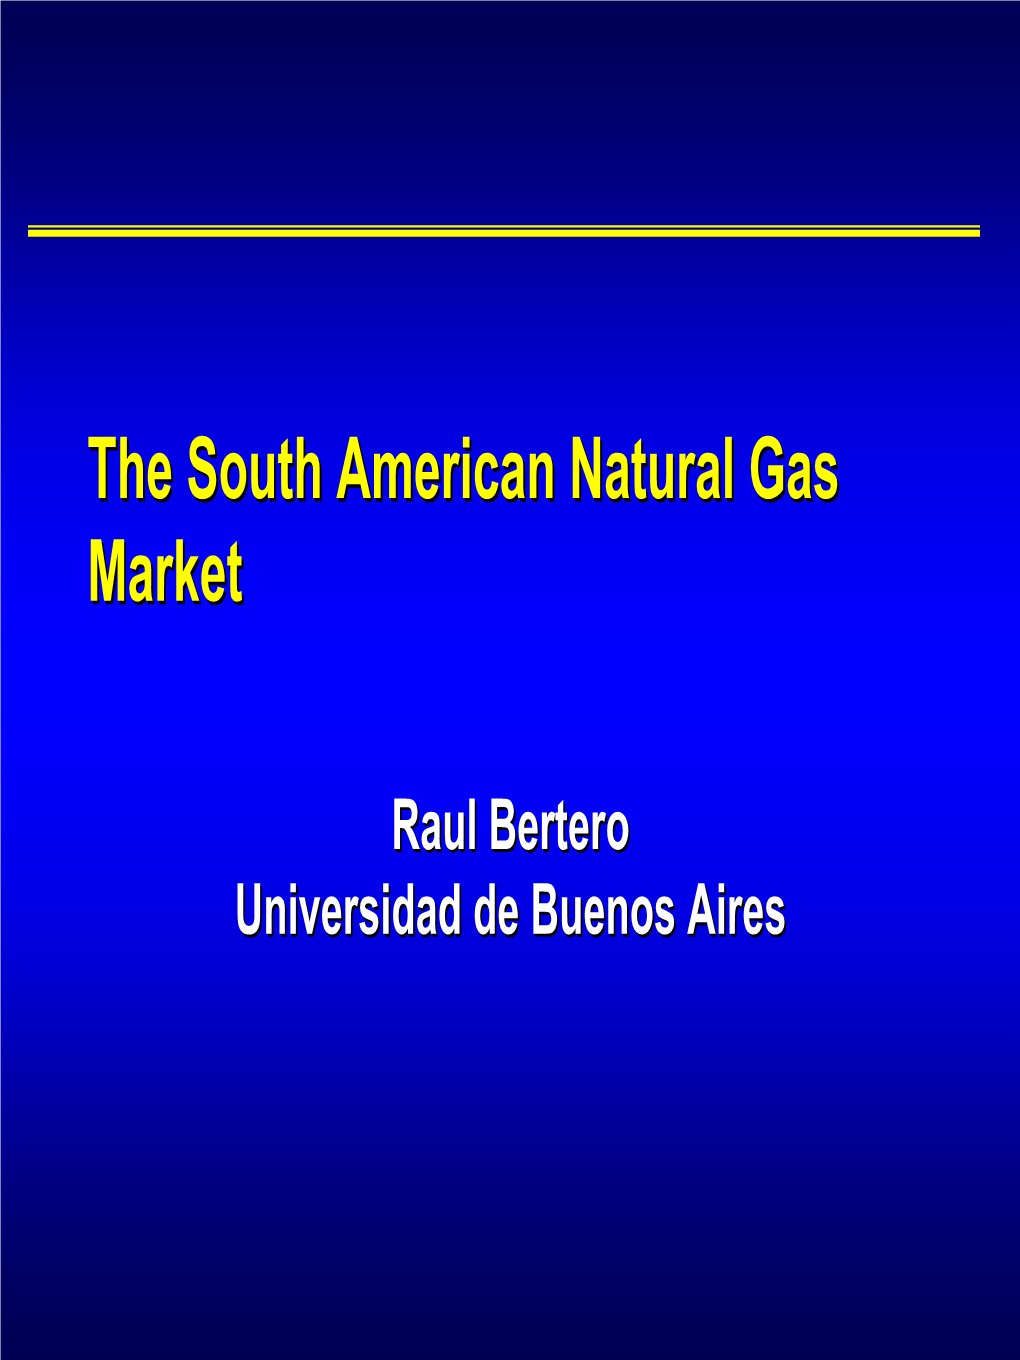 The South American Natural Gas Market